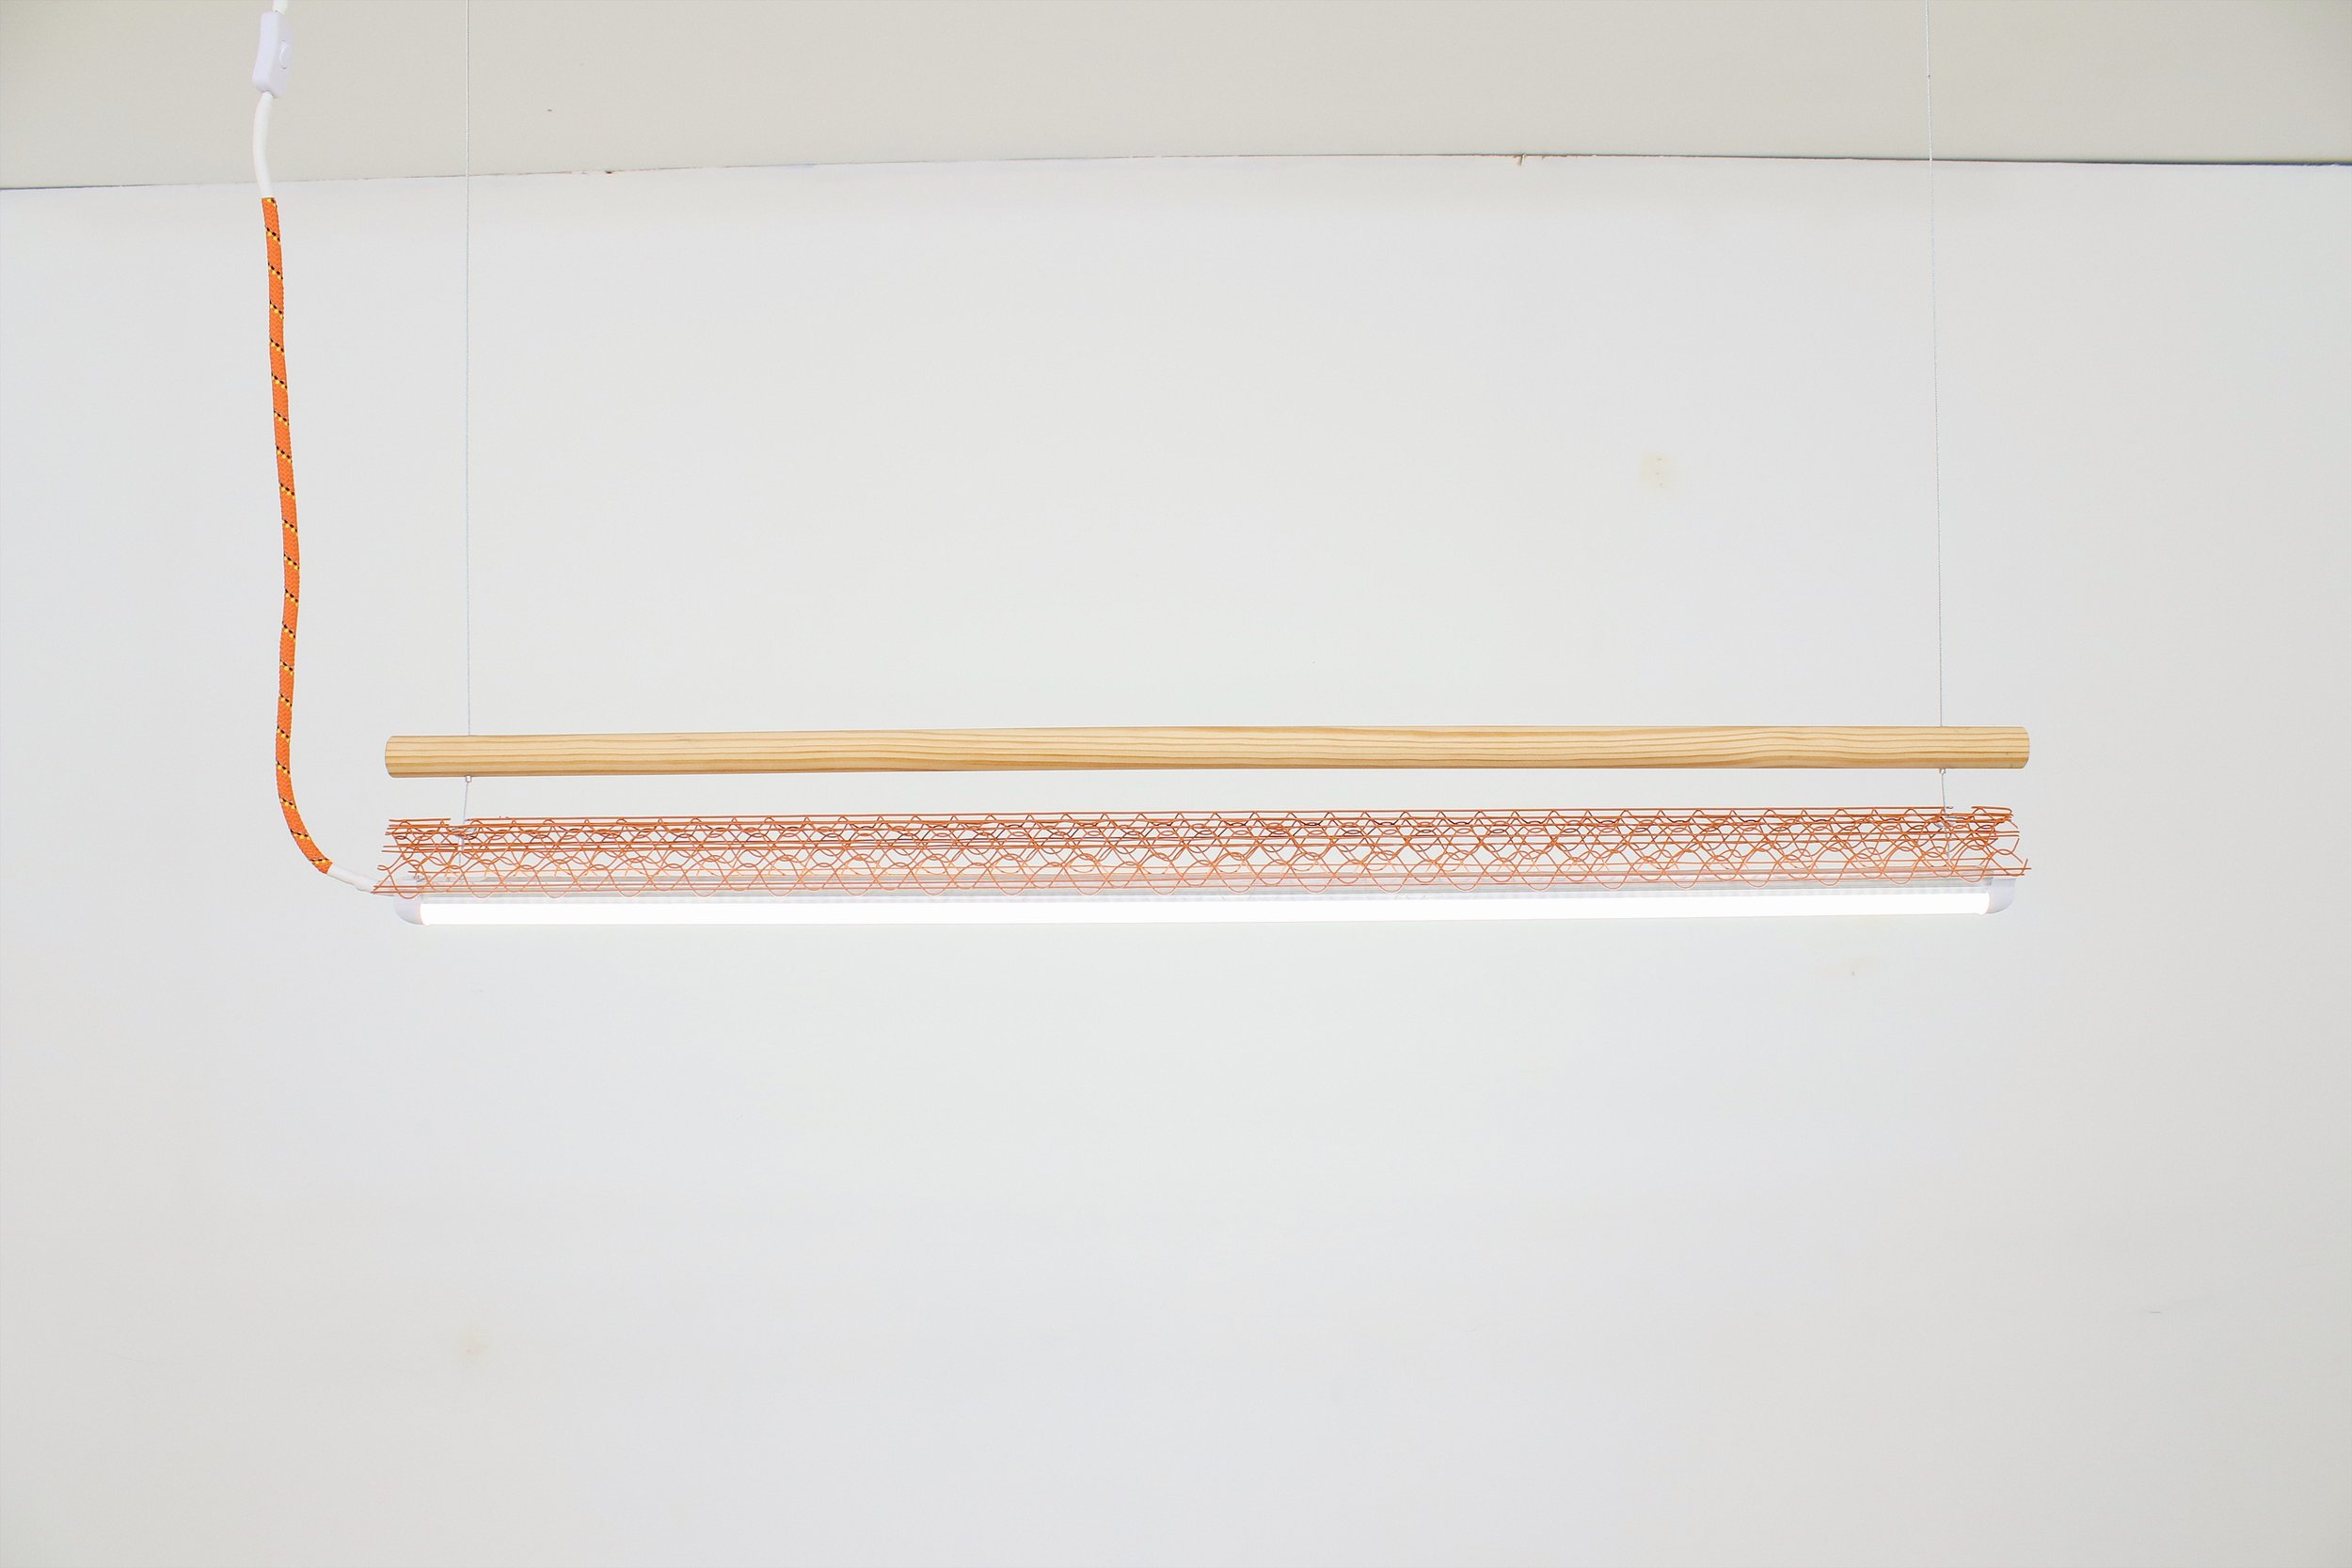 How to Build an LED Light FIxture